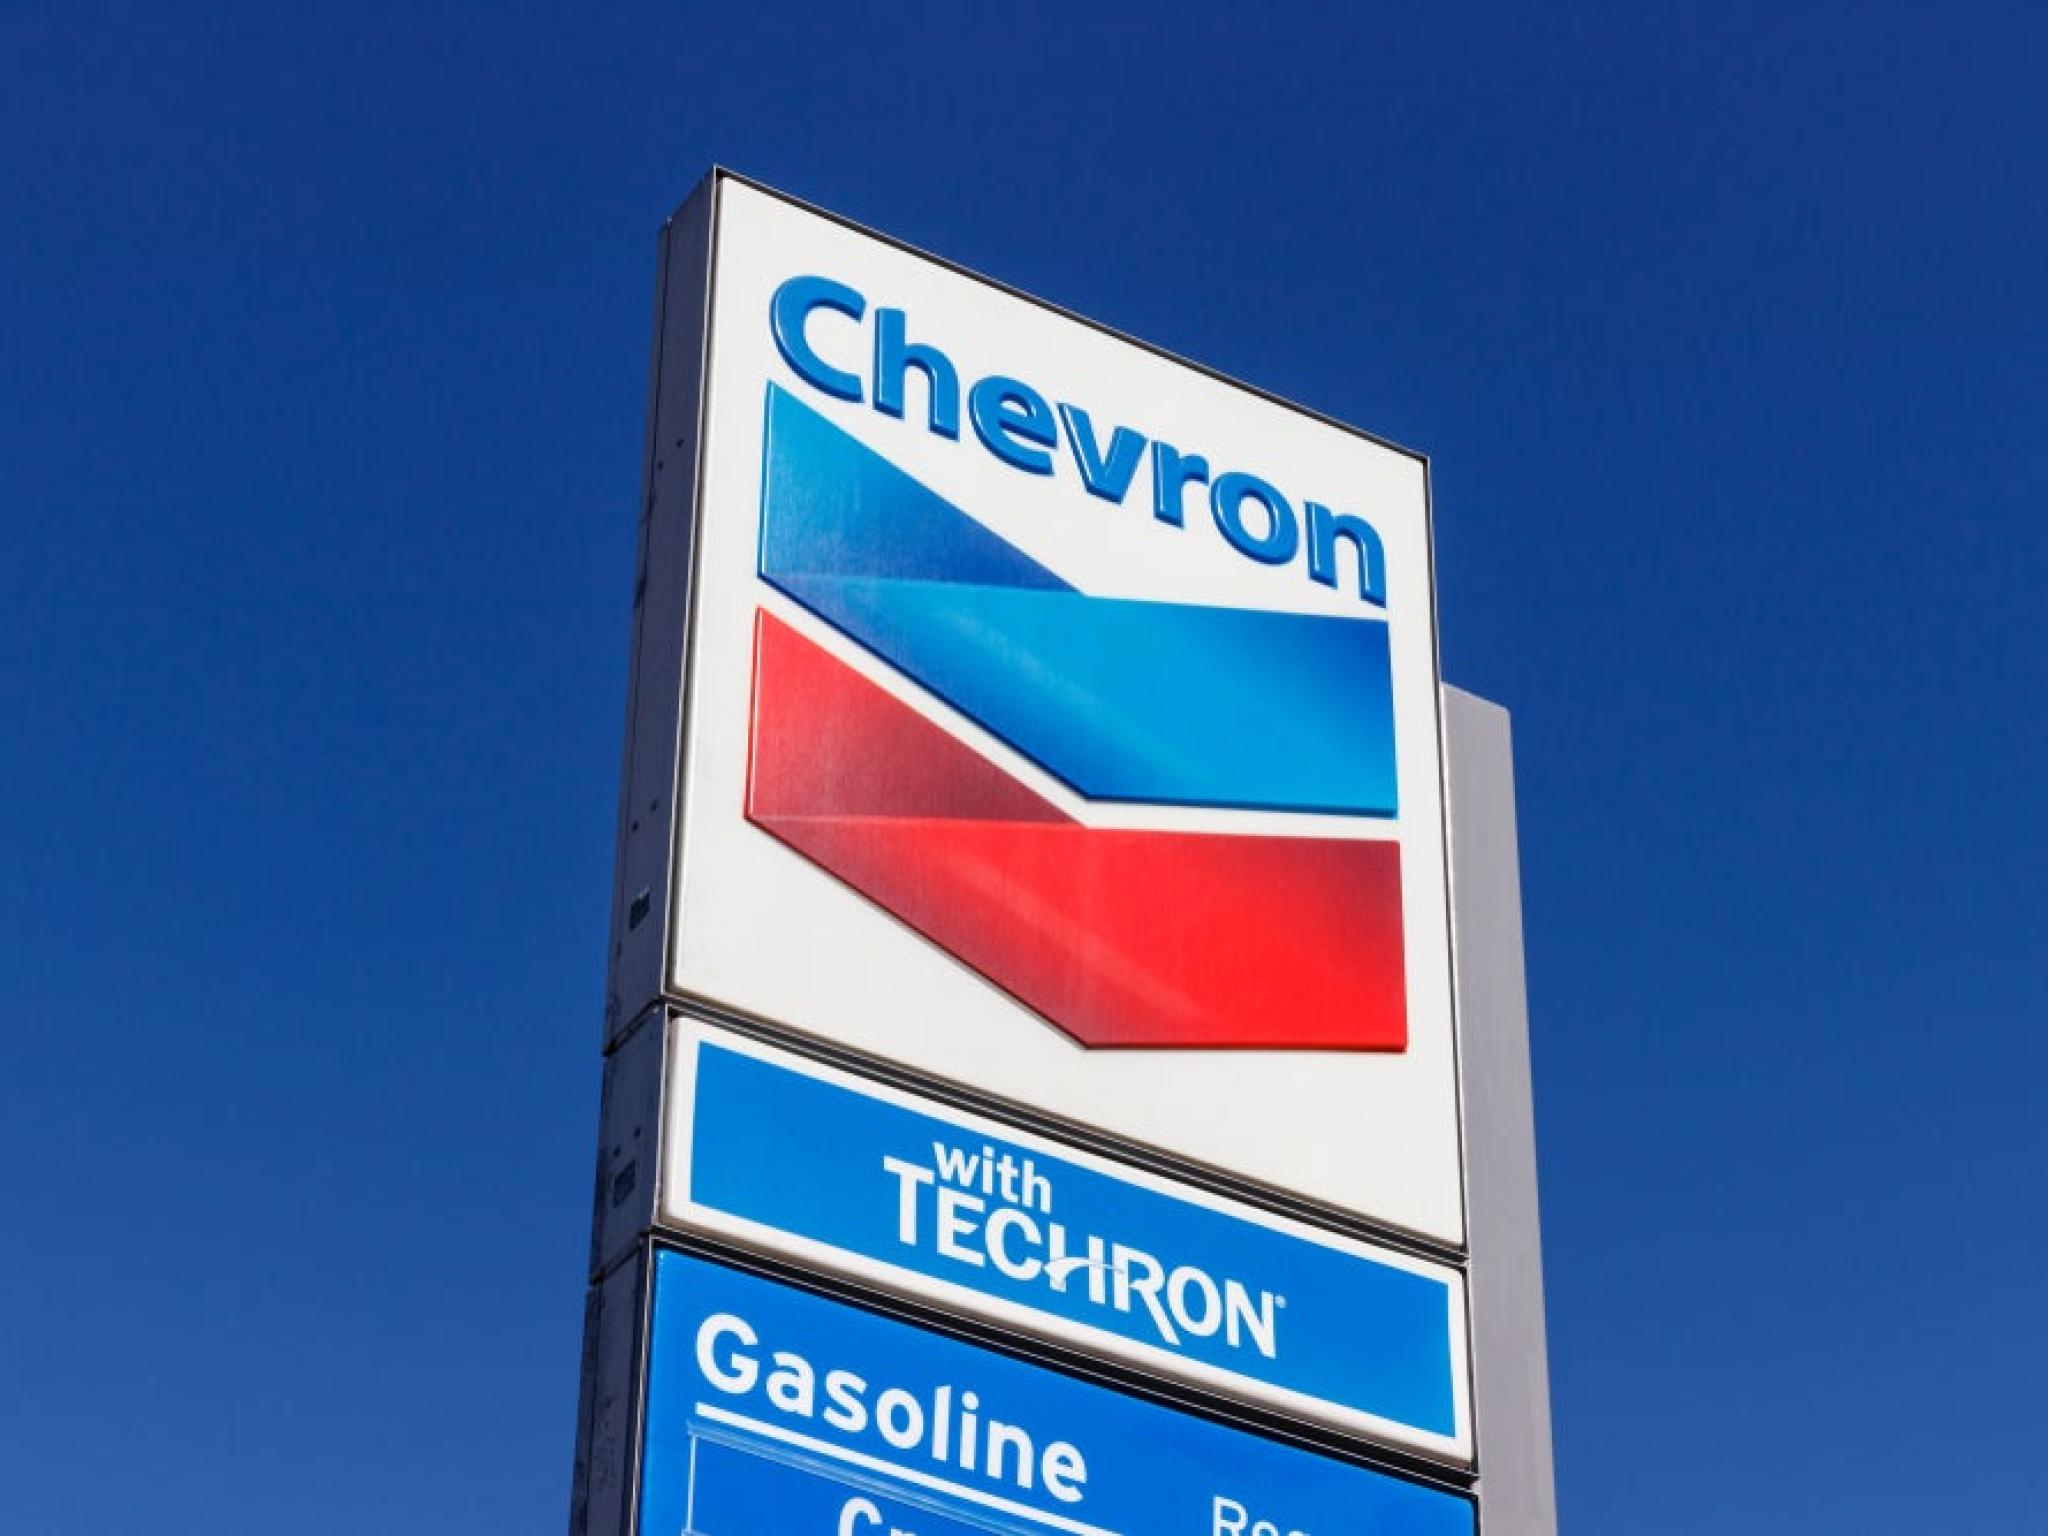  chevrons-q2-earnings-refining-woes-weigh-on-profit-relocates-hq-to-texas 